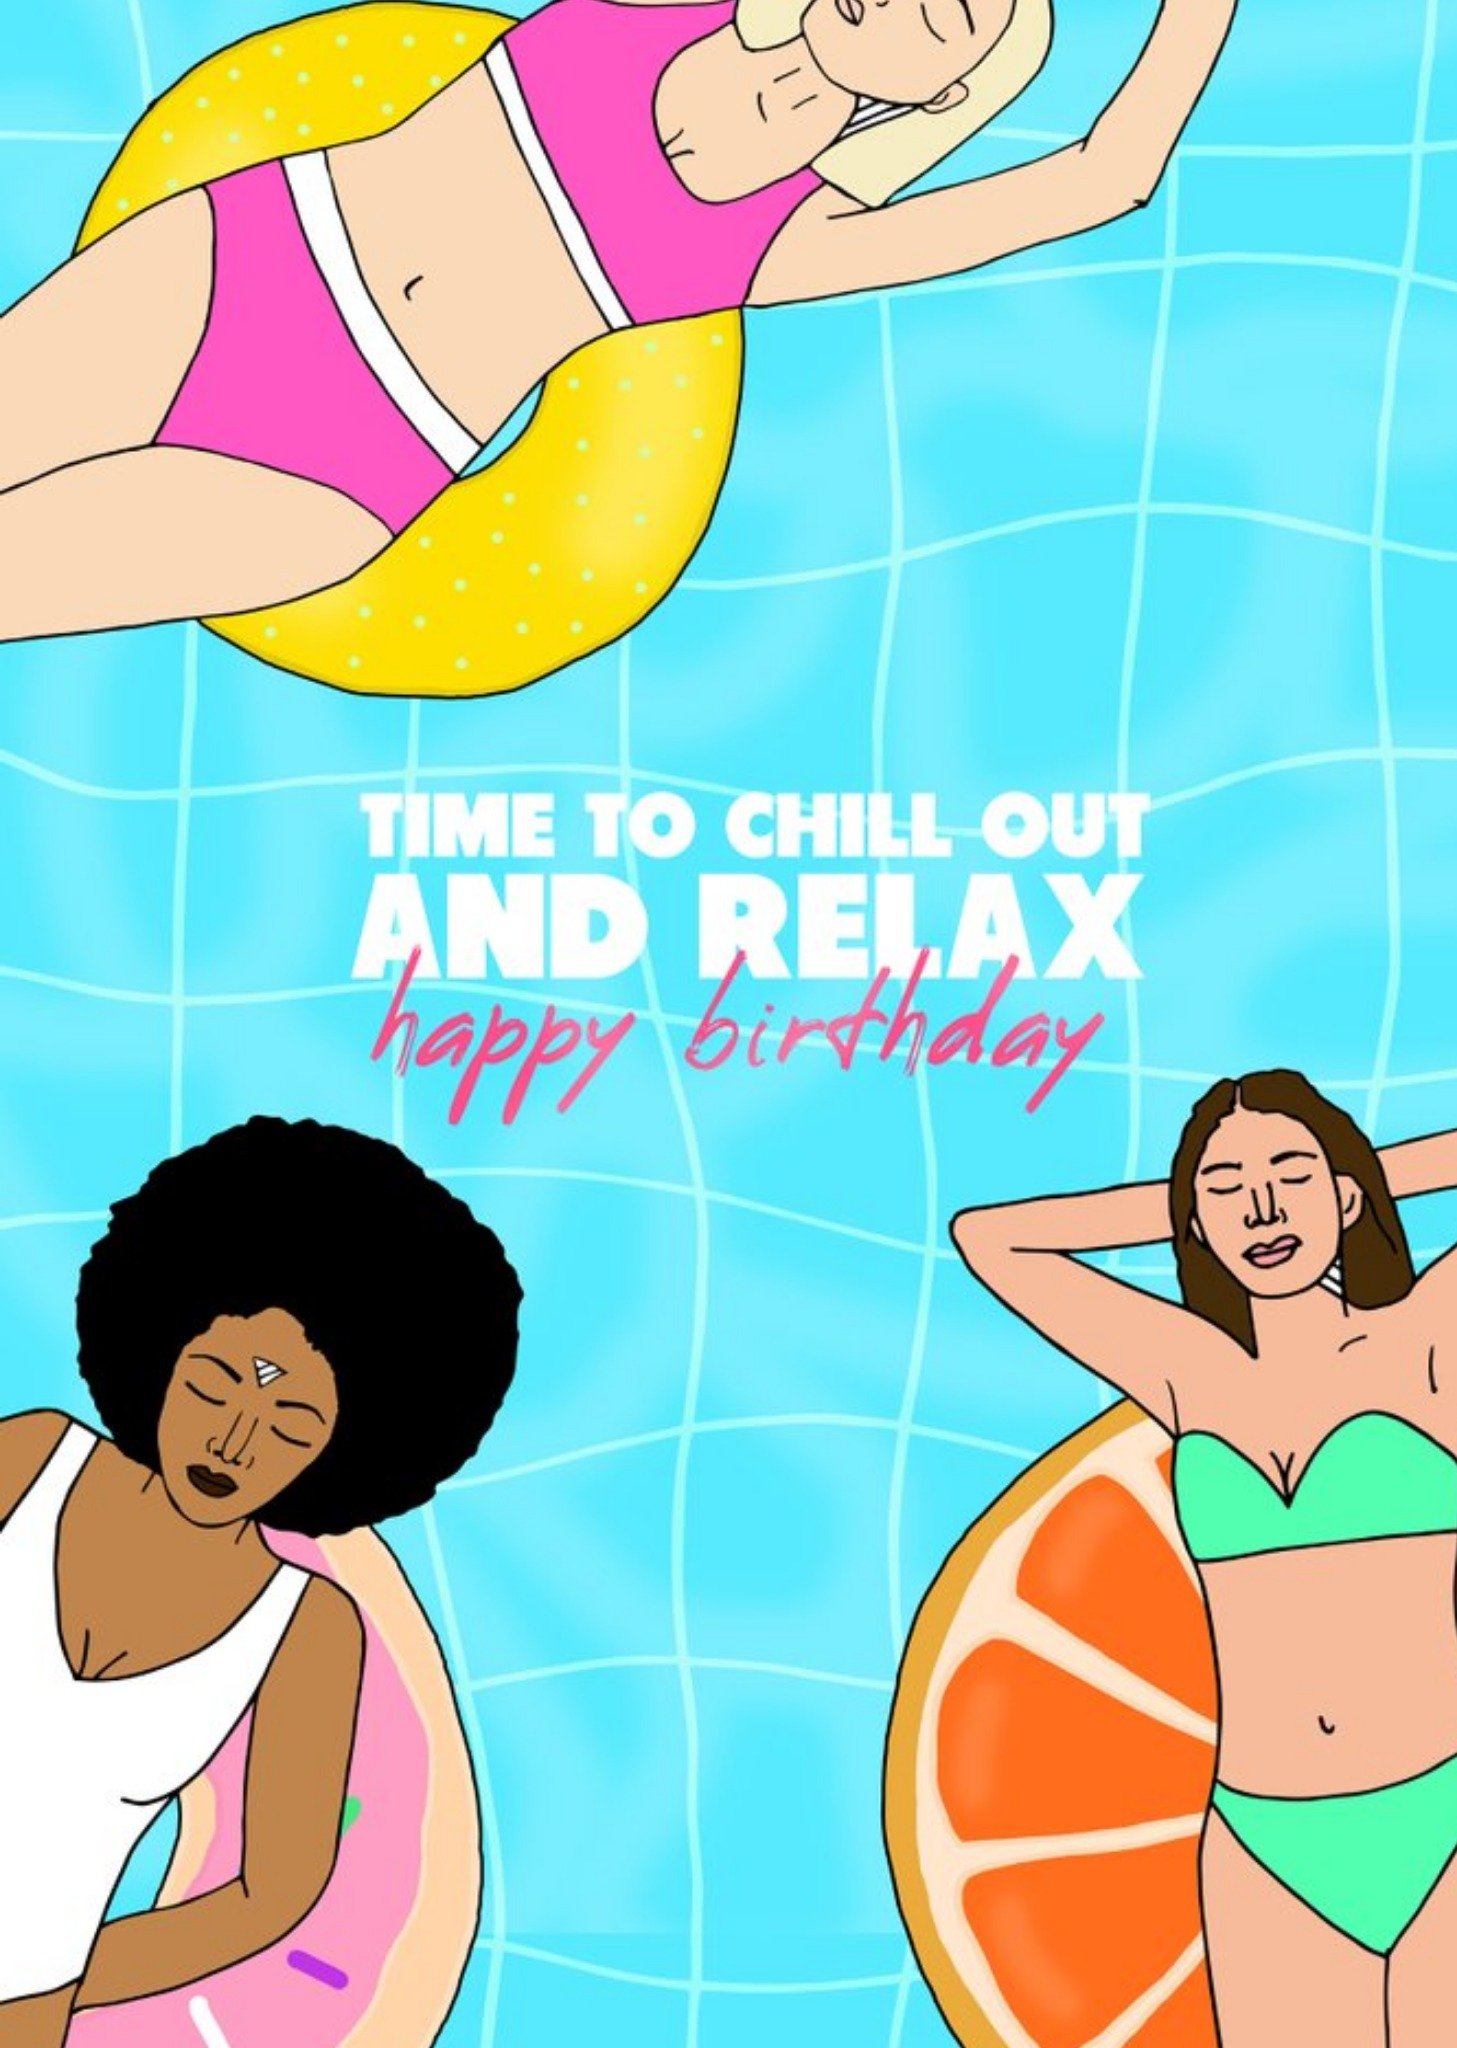 Moonpig Illustration Time To Chill Out And Relax Happy Birthday Card, Large